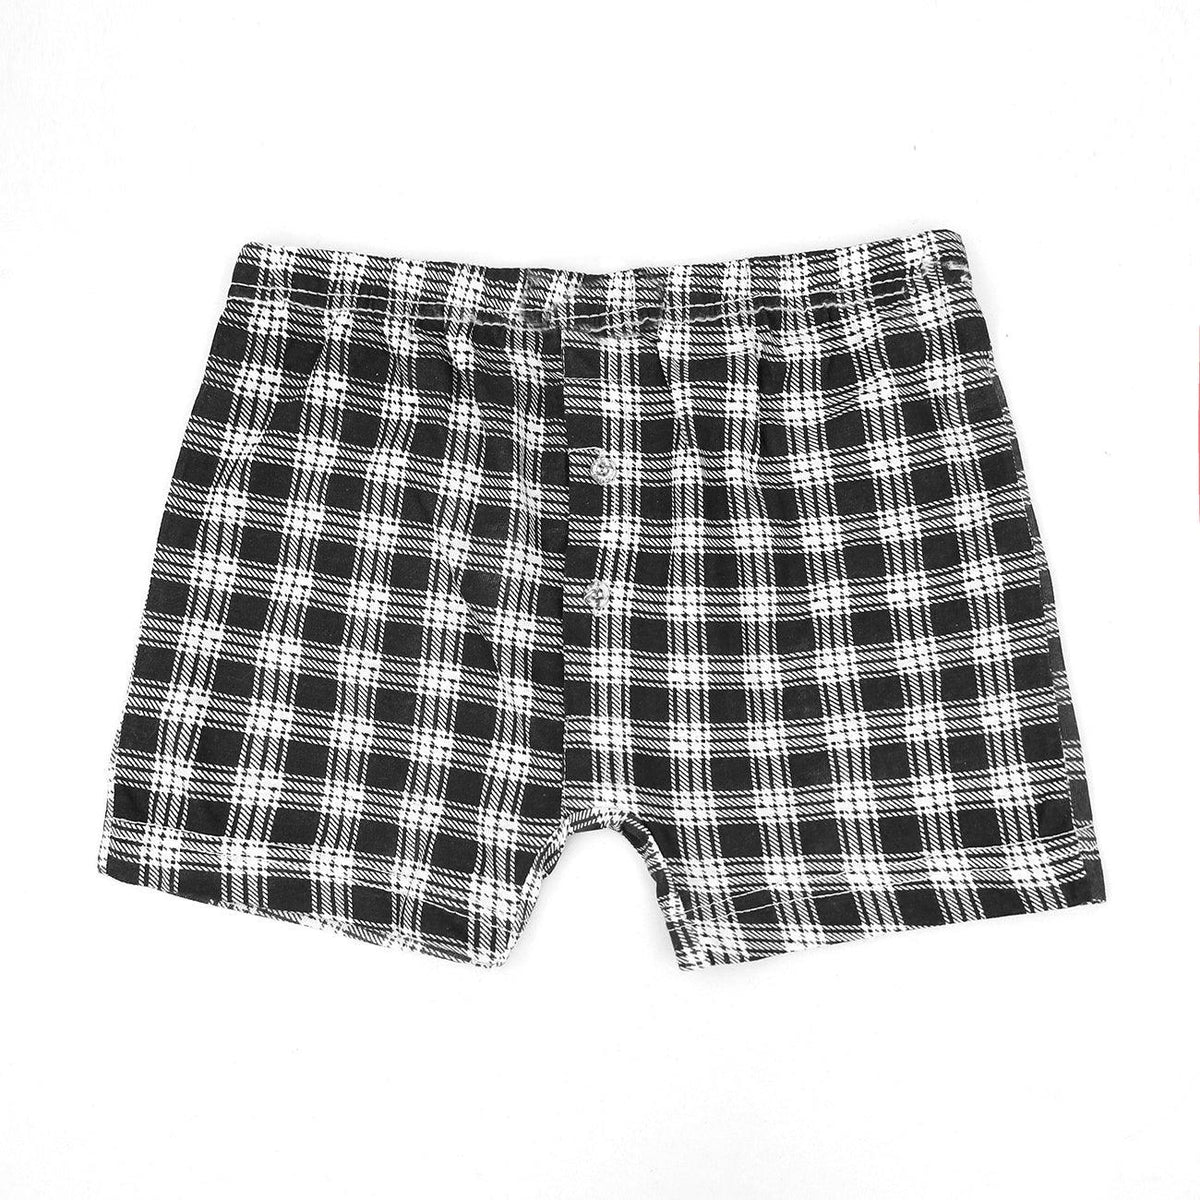 Two Button Fly Pack Of 3 Boxer Shorts For Men (CA-11696) - Brands River